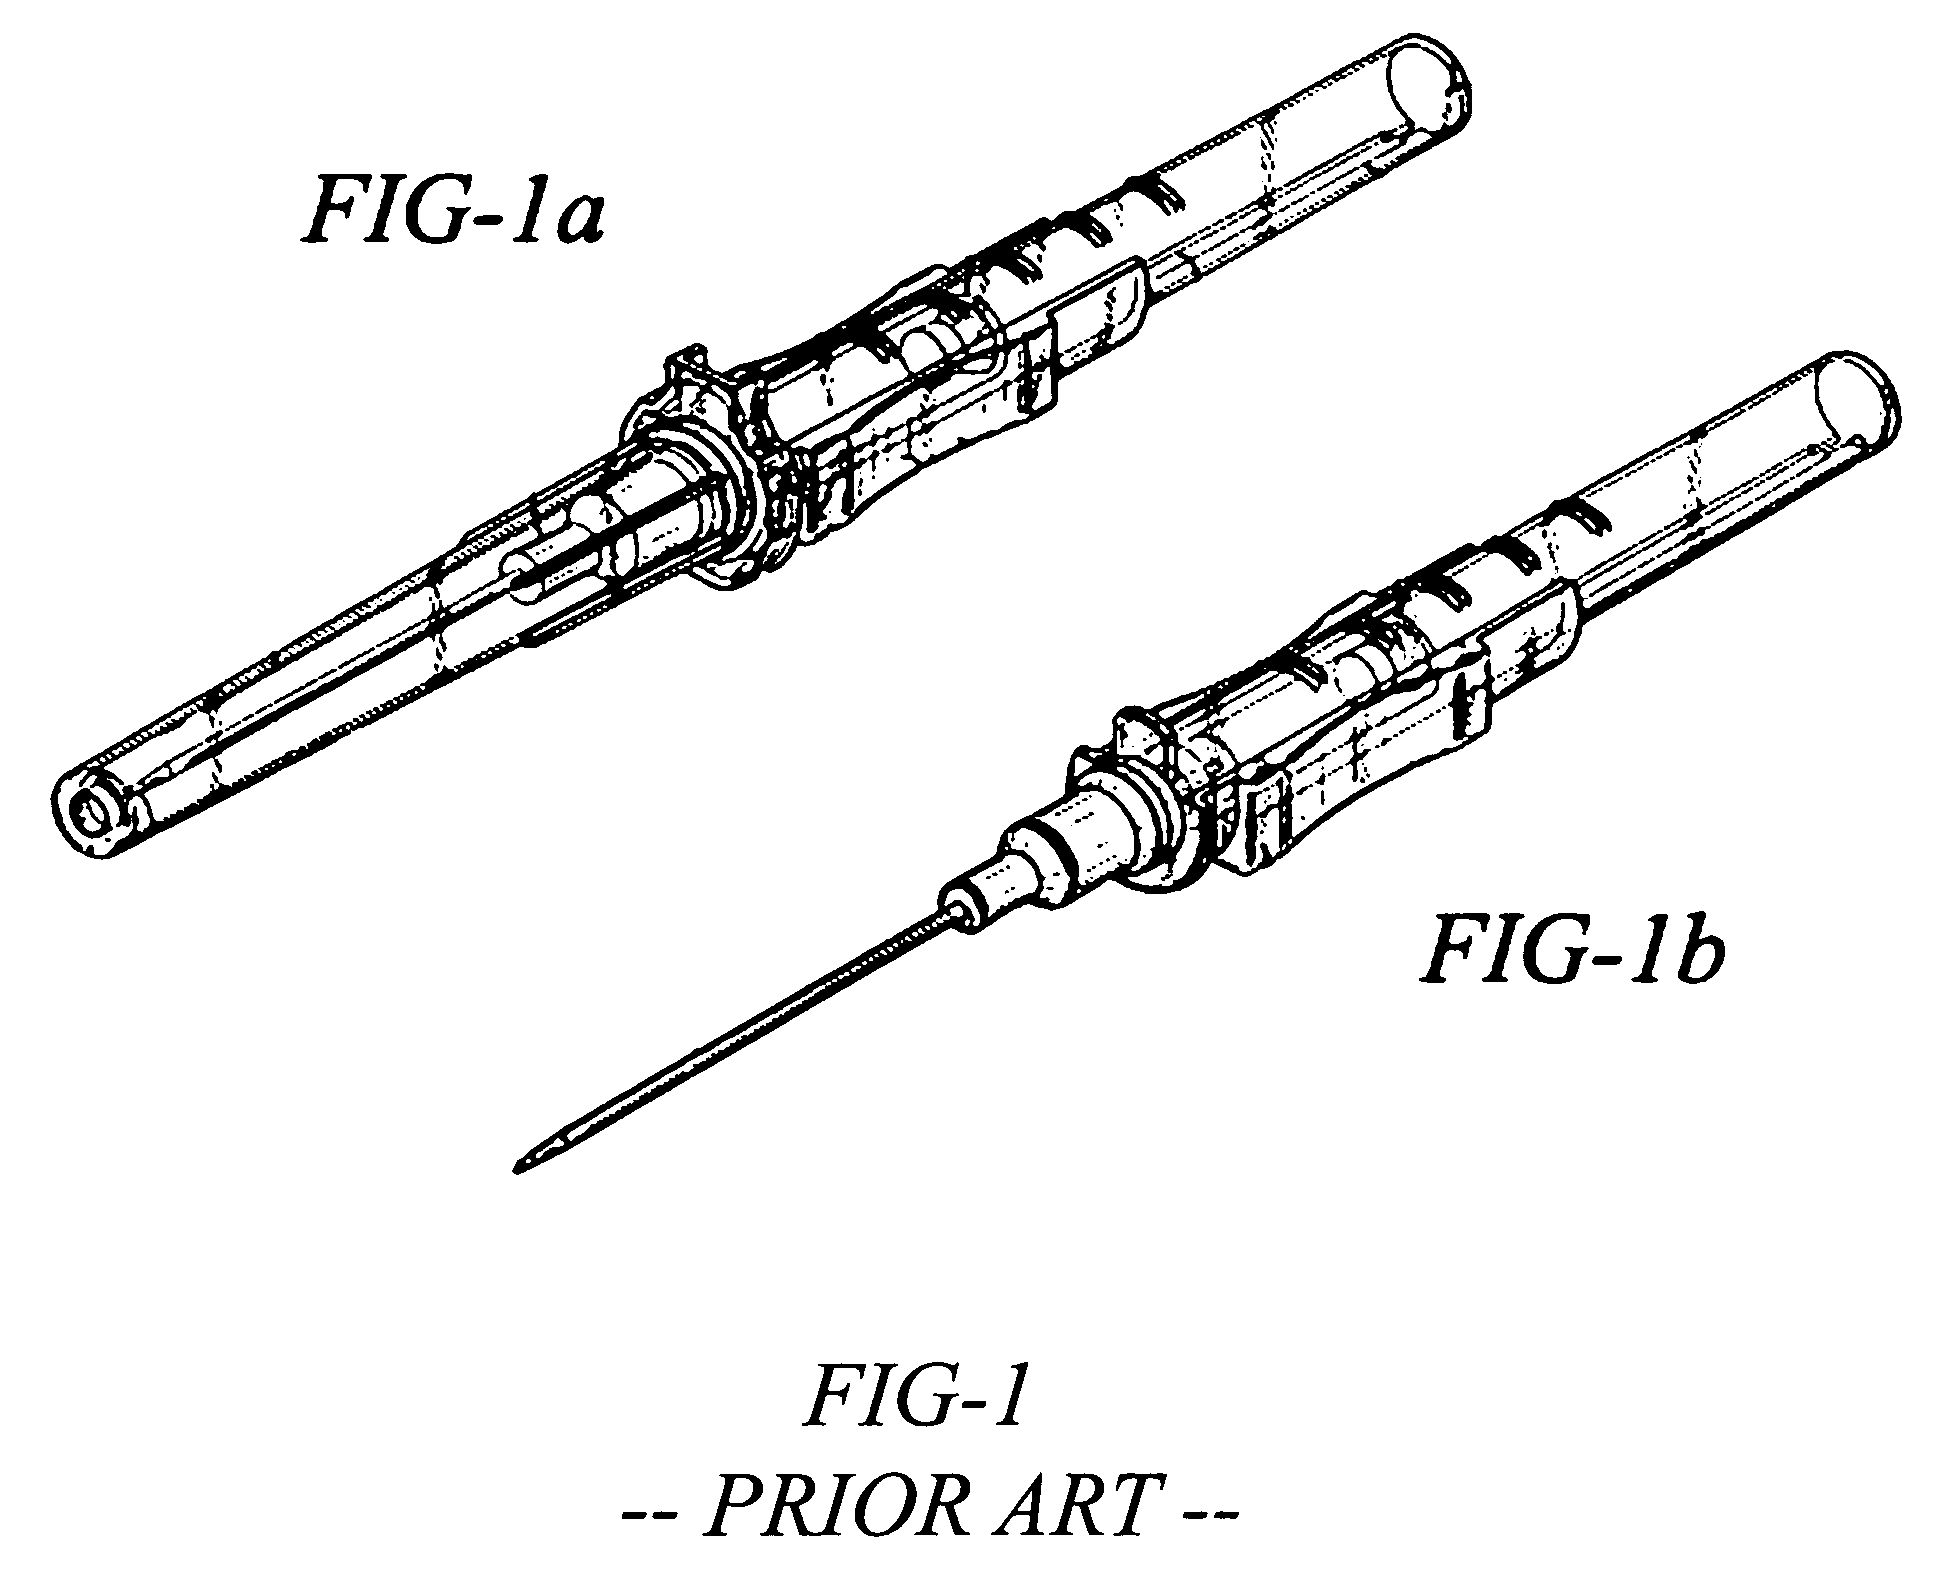 Skin puncture device with needle stick protection